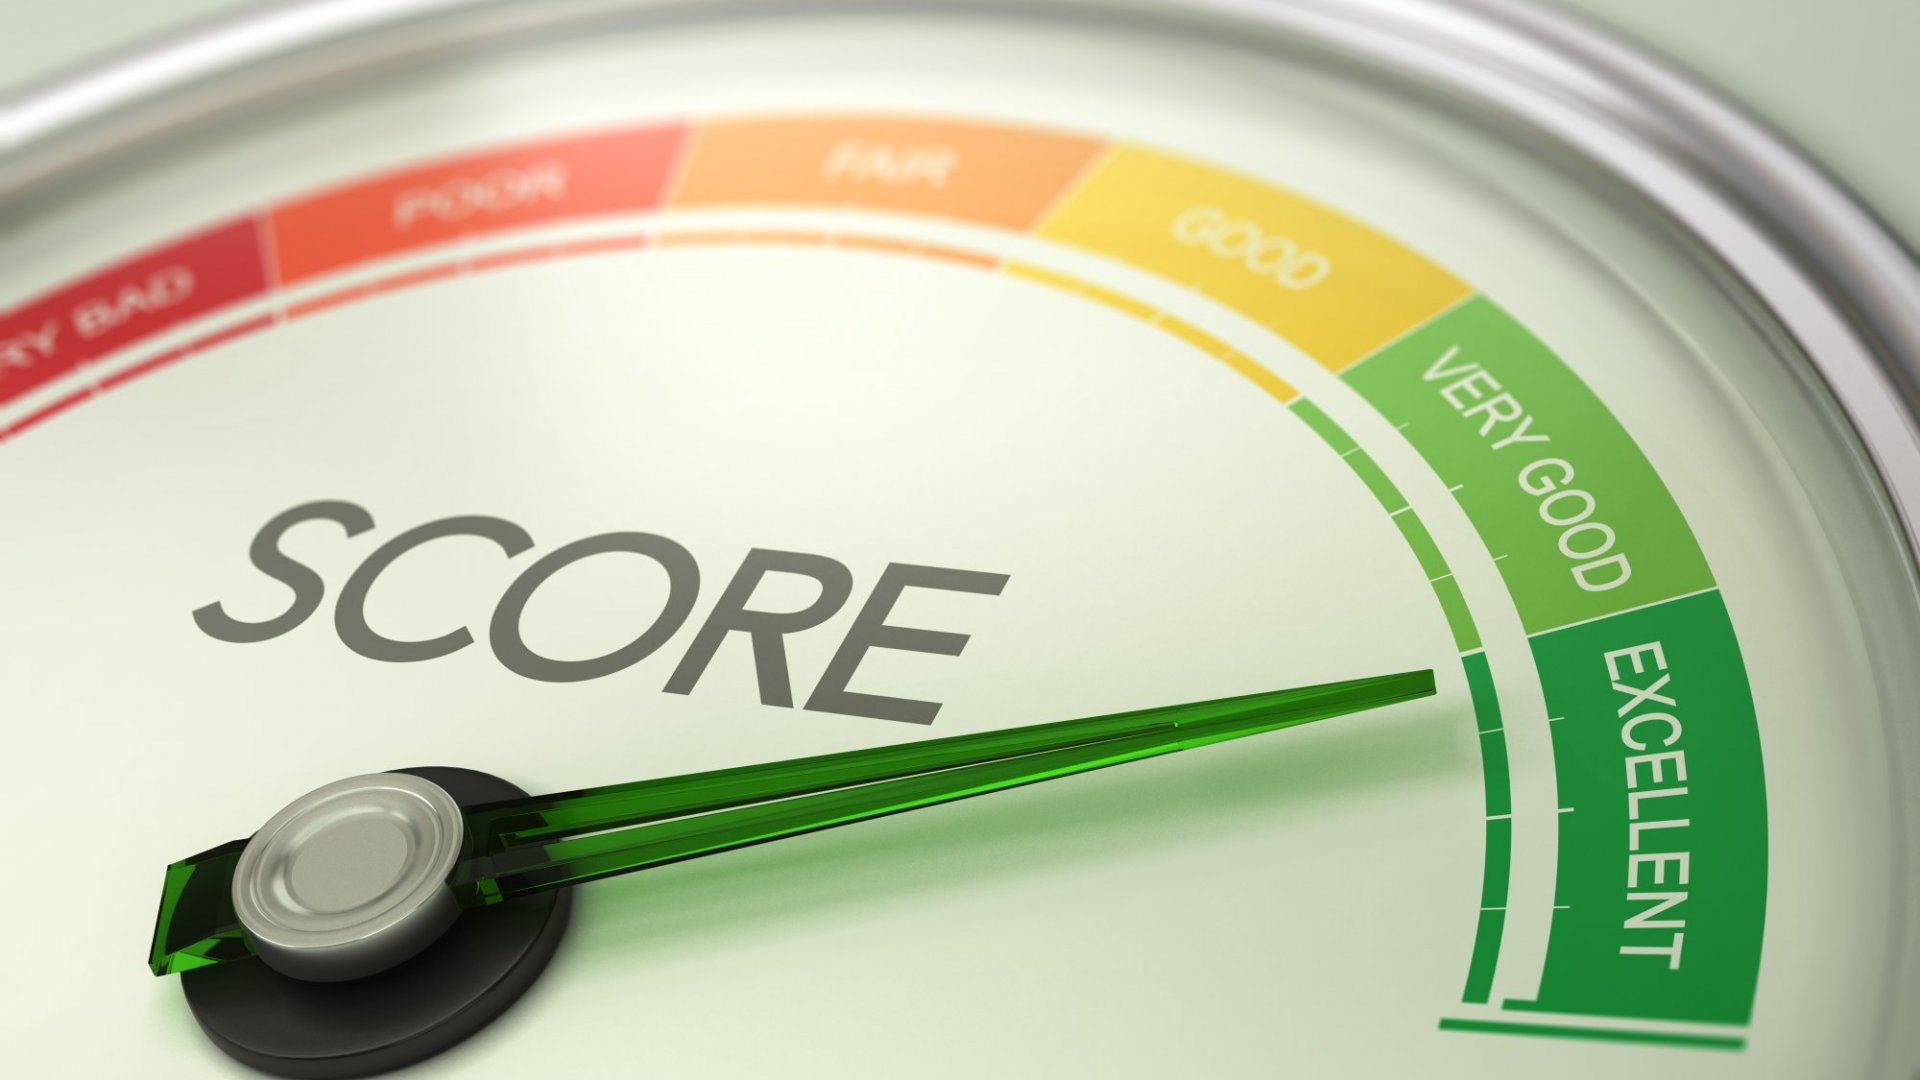 Are You Ready For A New Credit Scoring System? How To Improve Your Credit Score